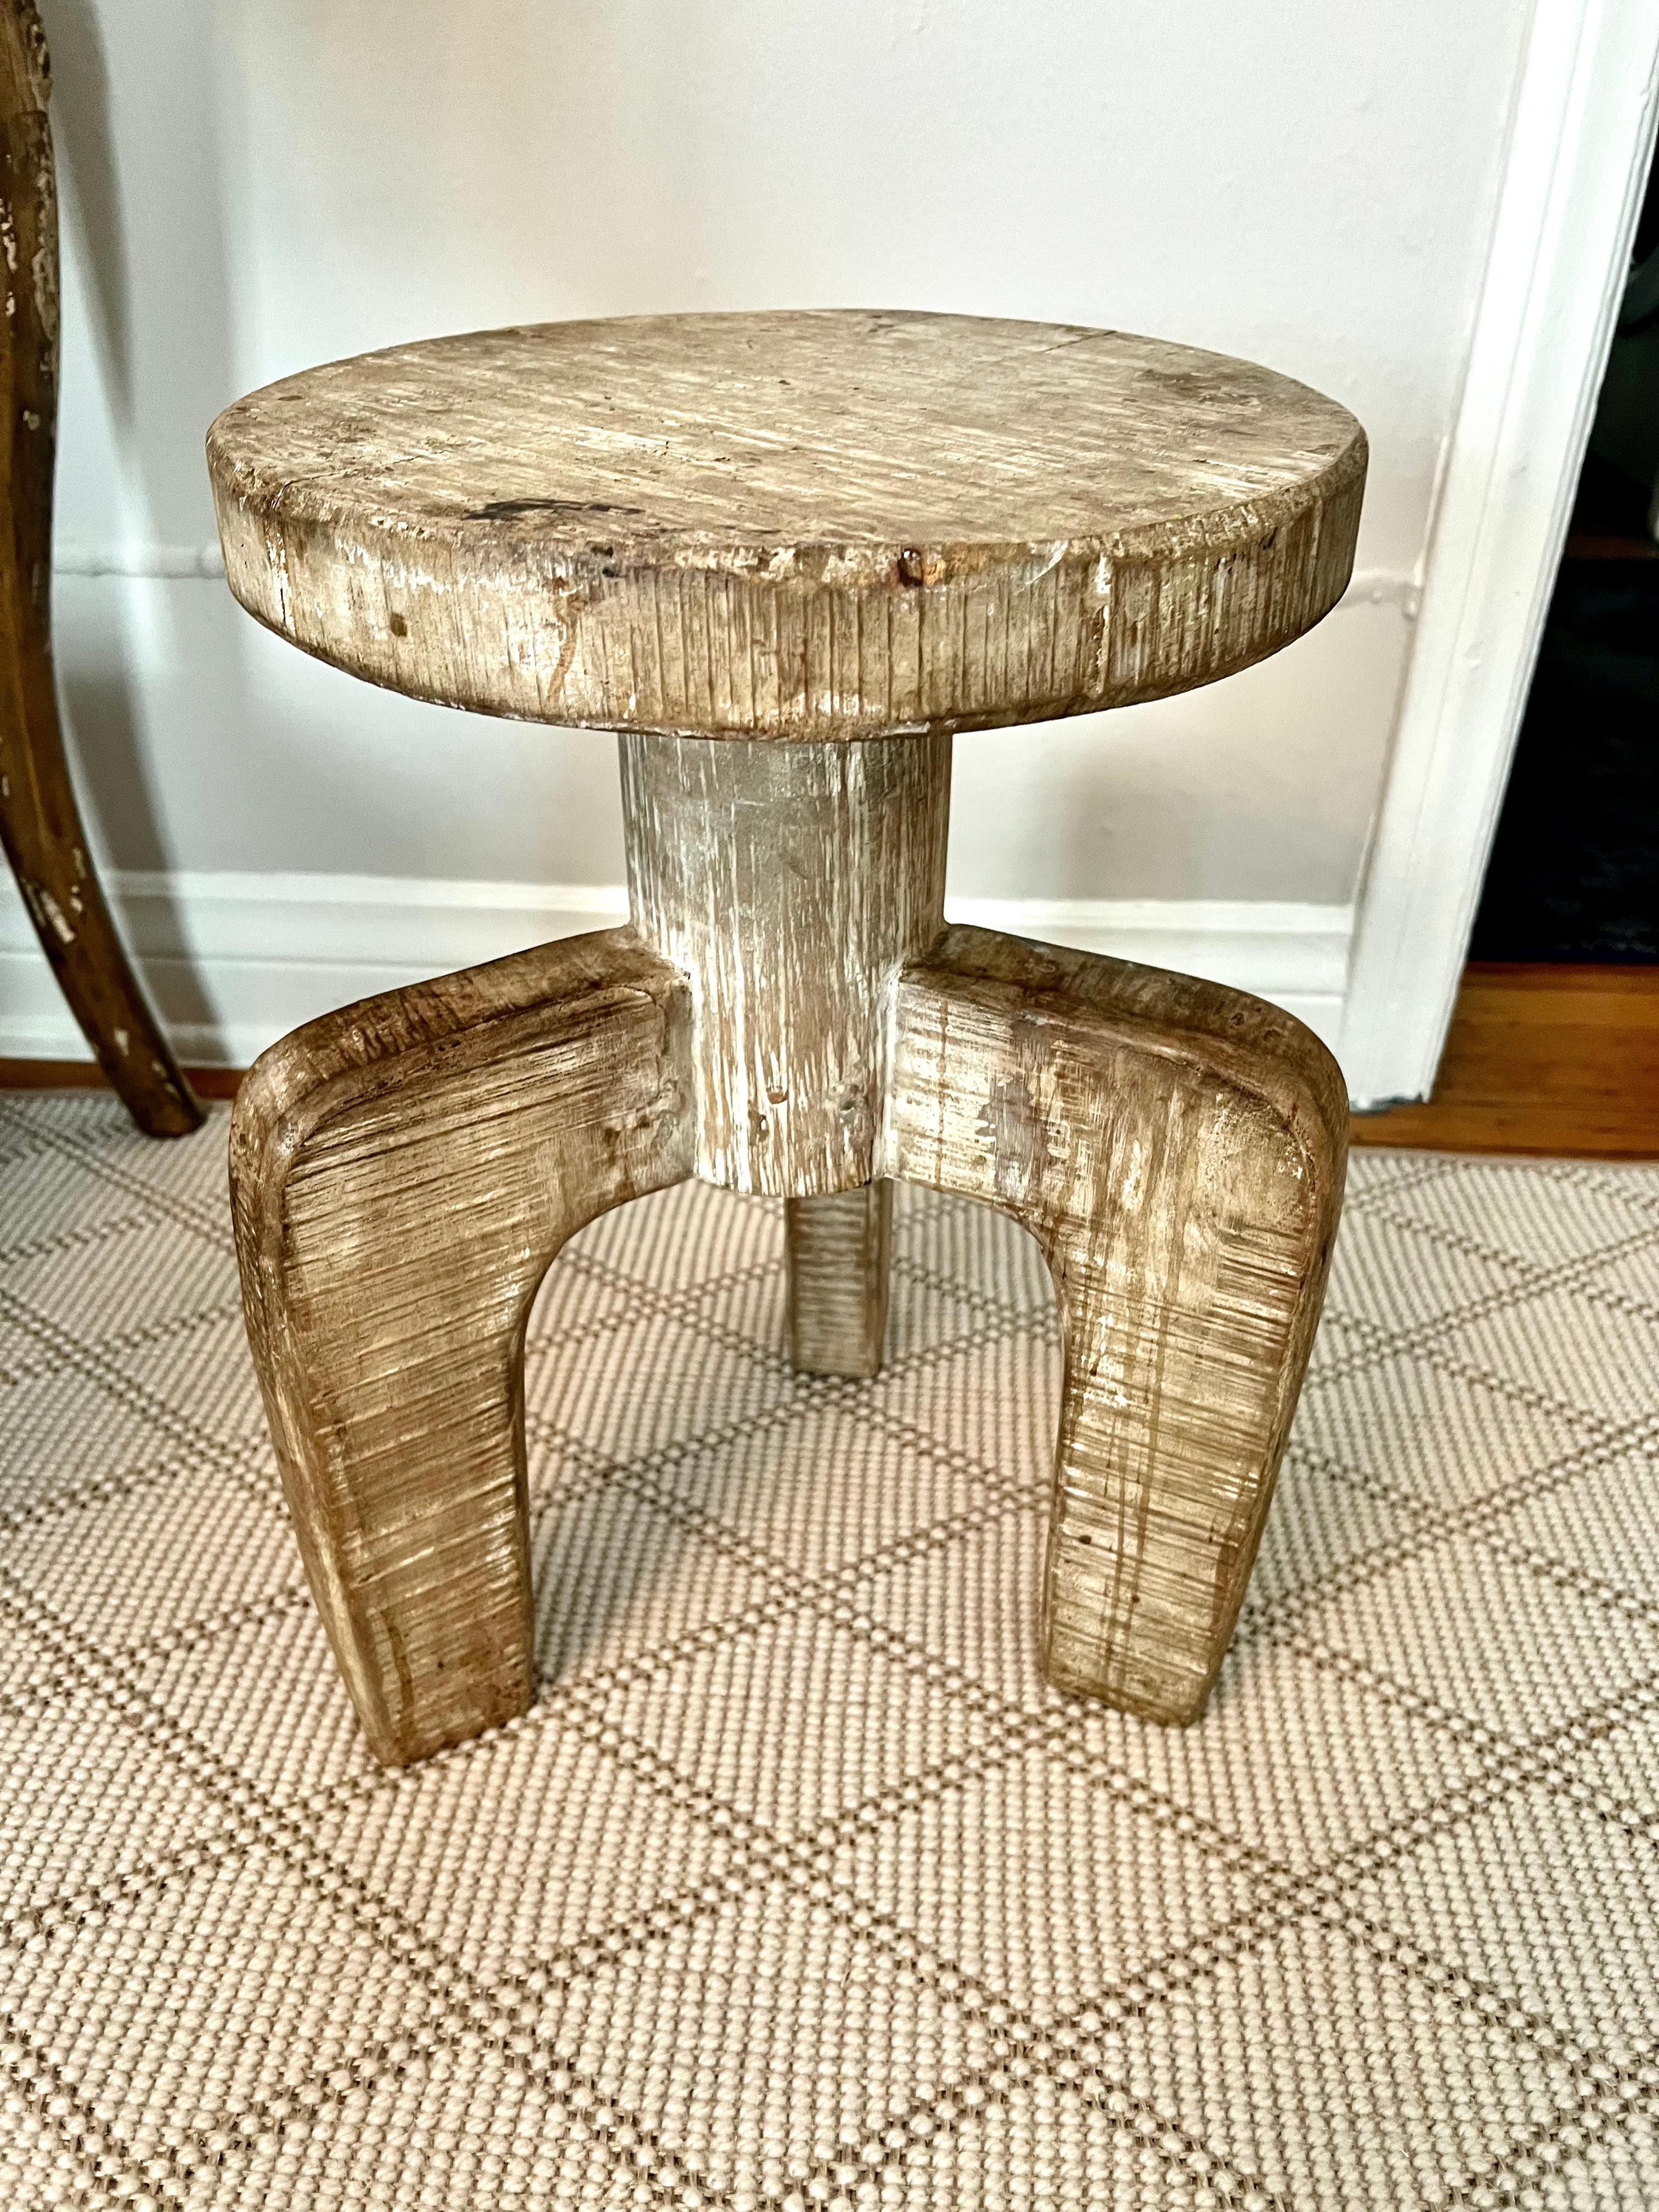 A uniquely designed three legged stool or side table in a washed cerused finish of organic white The legs sit upon a column for the seat - a compliment to any setting with a neutral or organic feel. 

Can easily be placed under a console or behind